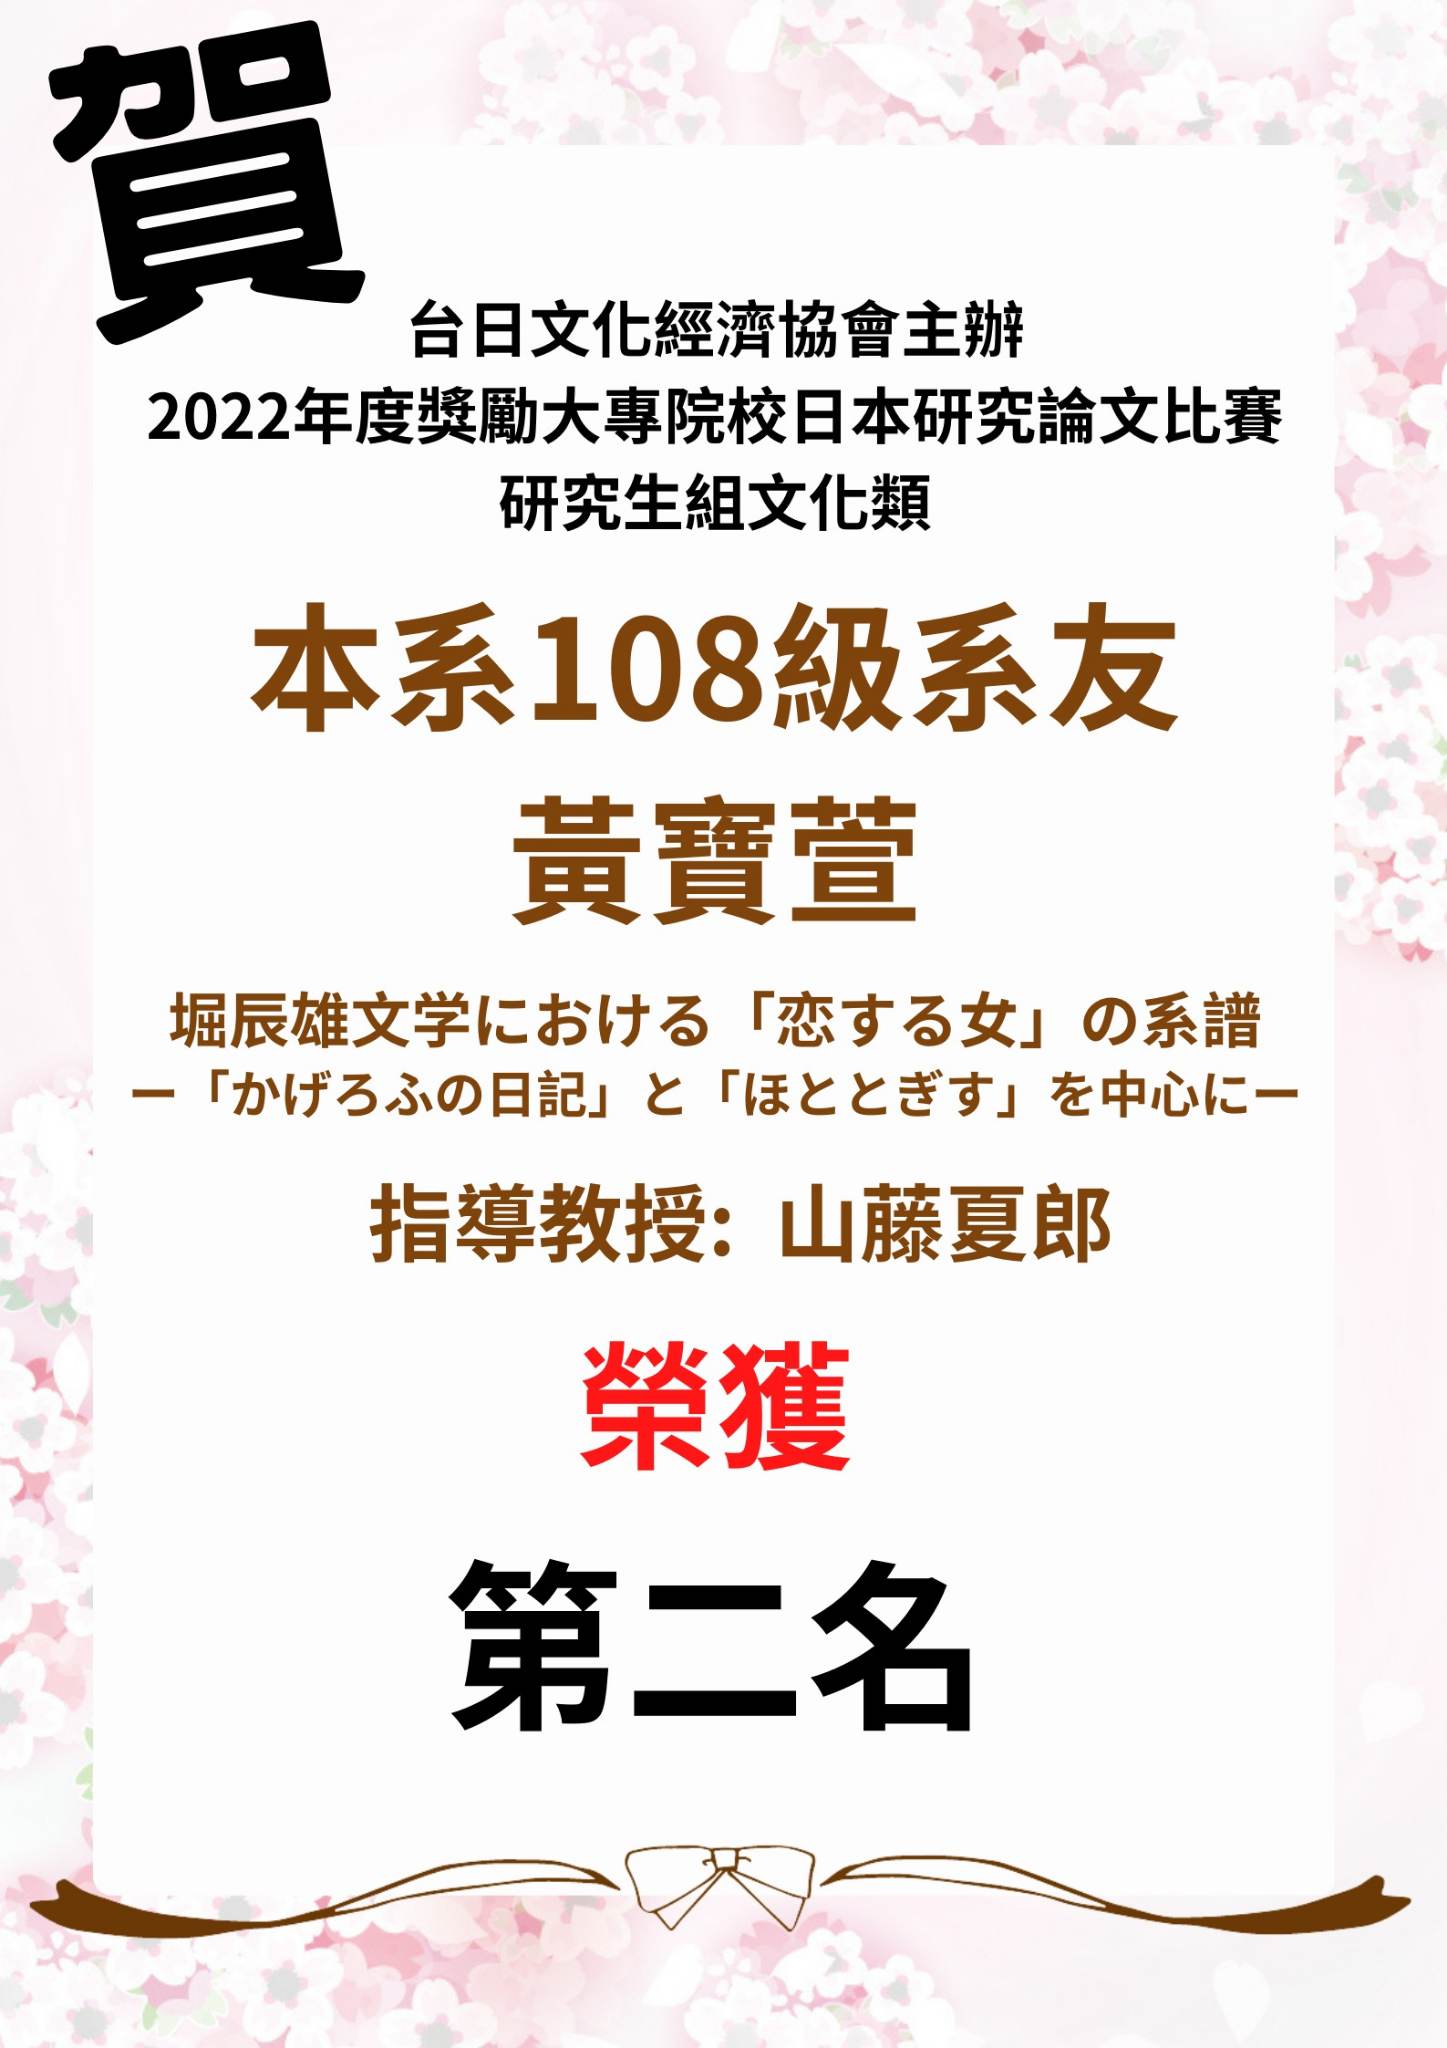 【Congratulations】Incentives Japanese Studies Paper Competition for Tertiary Institutions